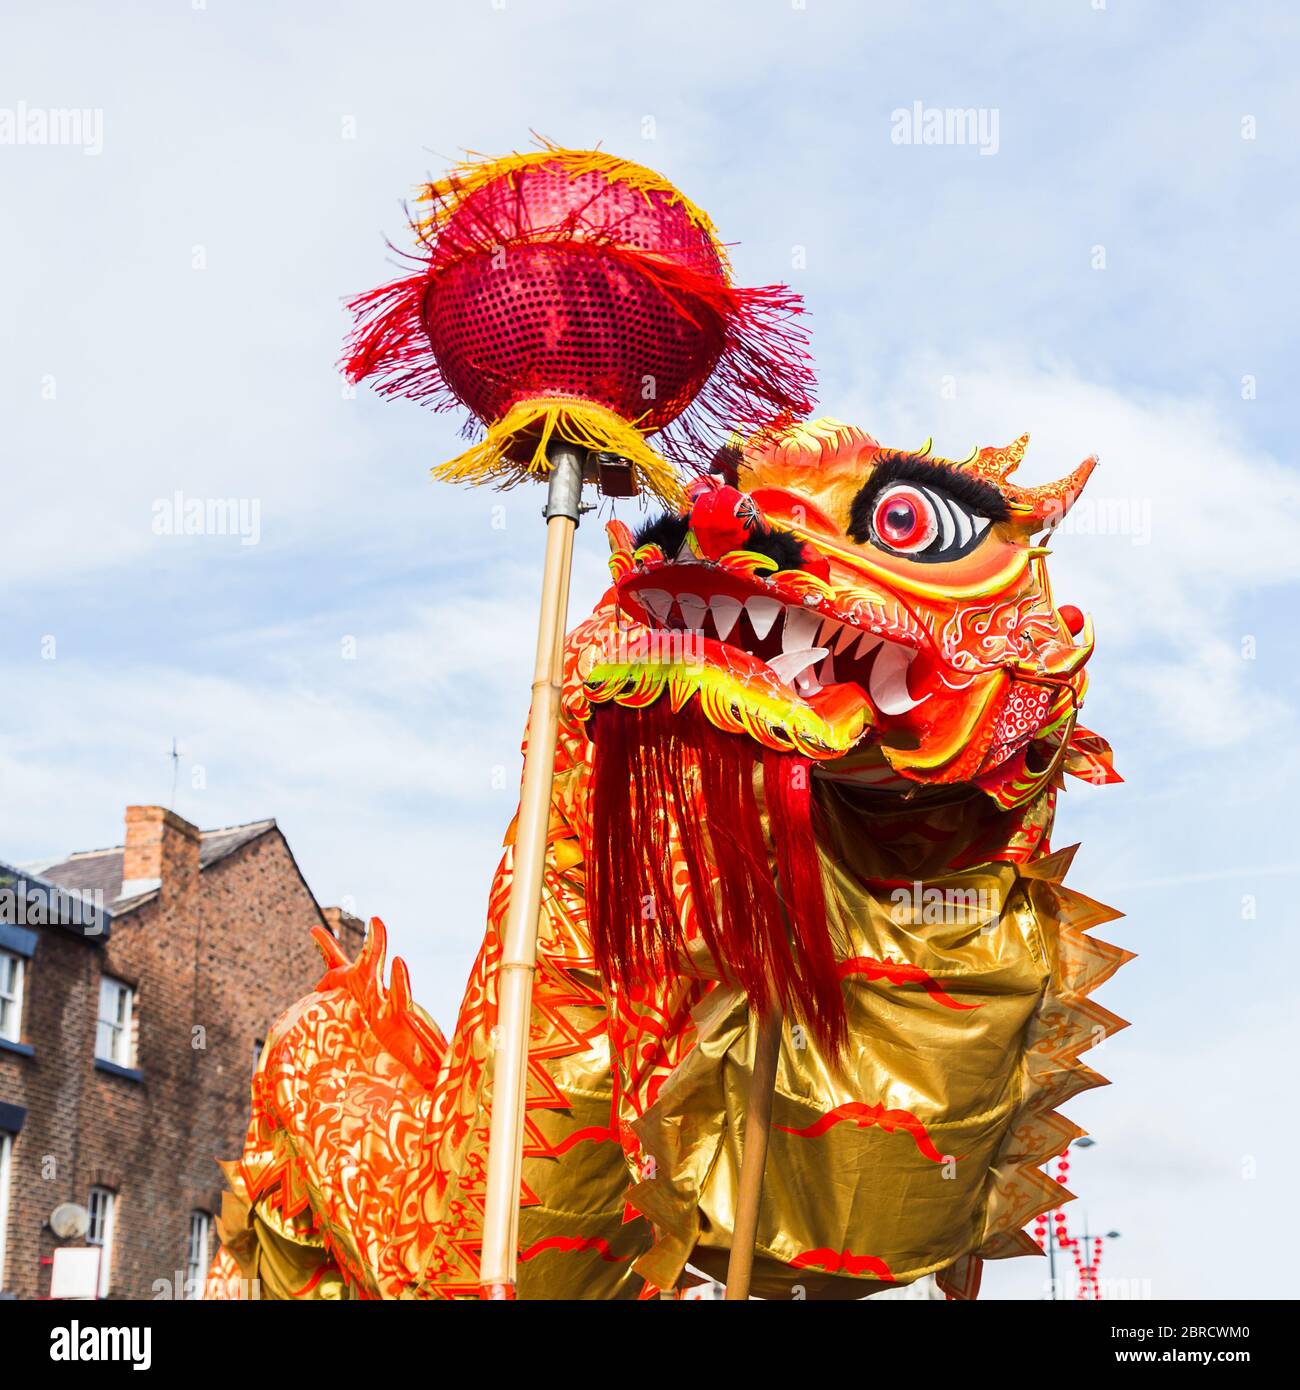 The vivid orange, red and yellow coloured dragon chases the pearl during the dragon dance in Liverpool to mark the Chinese New Year. Stock Photo